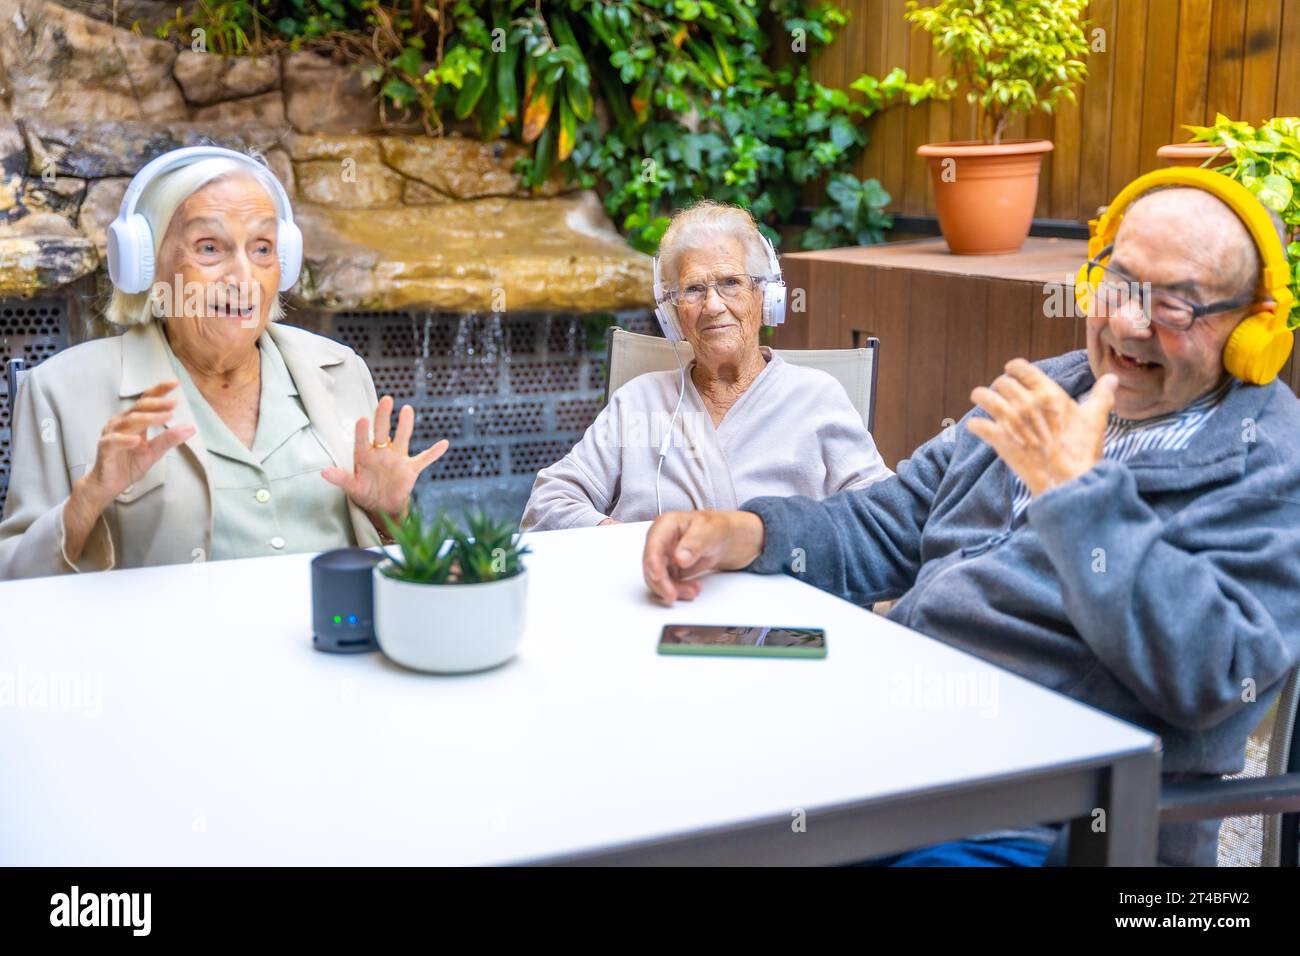 Three happy and cute seniors enjoying listening to music with headphones in a geriatric Stock Photo